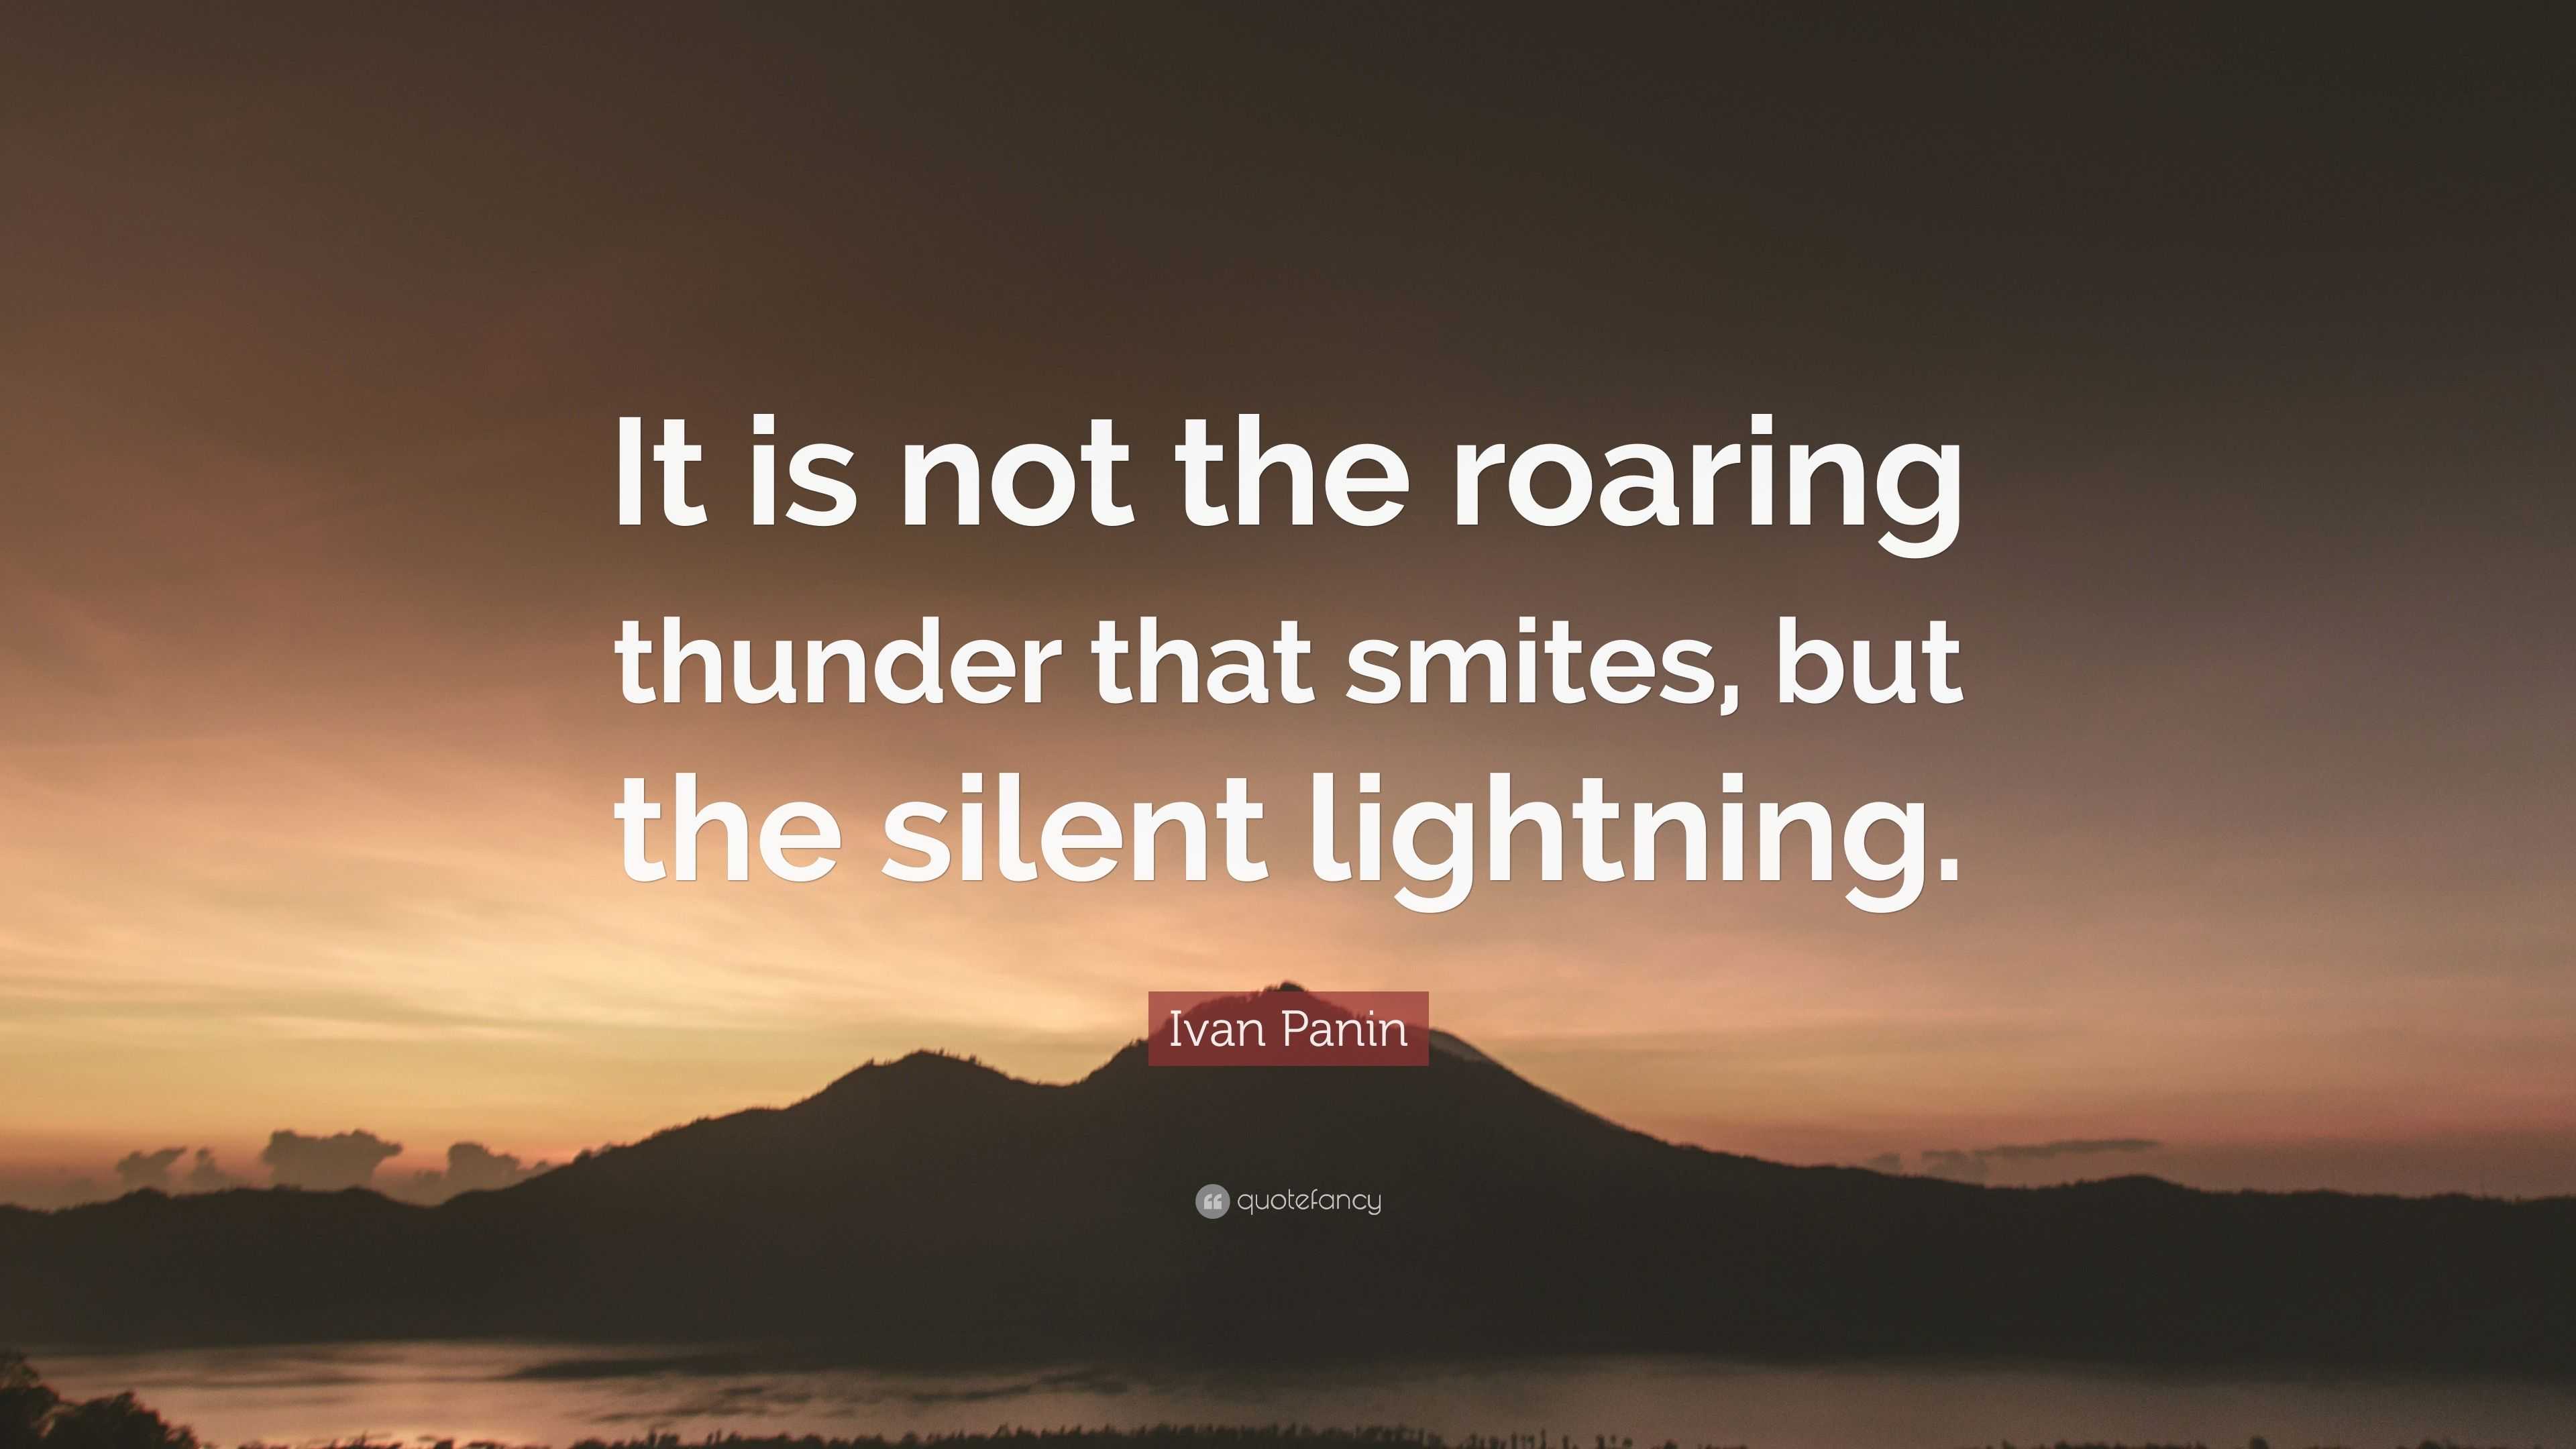 Ivan Panin Quote: “It is not the roaring thunder that smites, but the  silent lightning.”